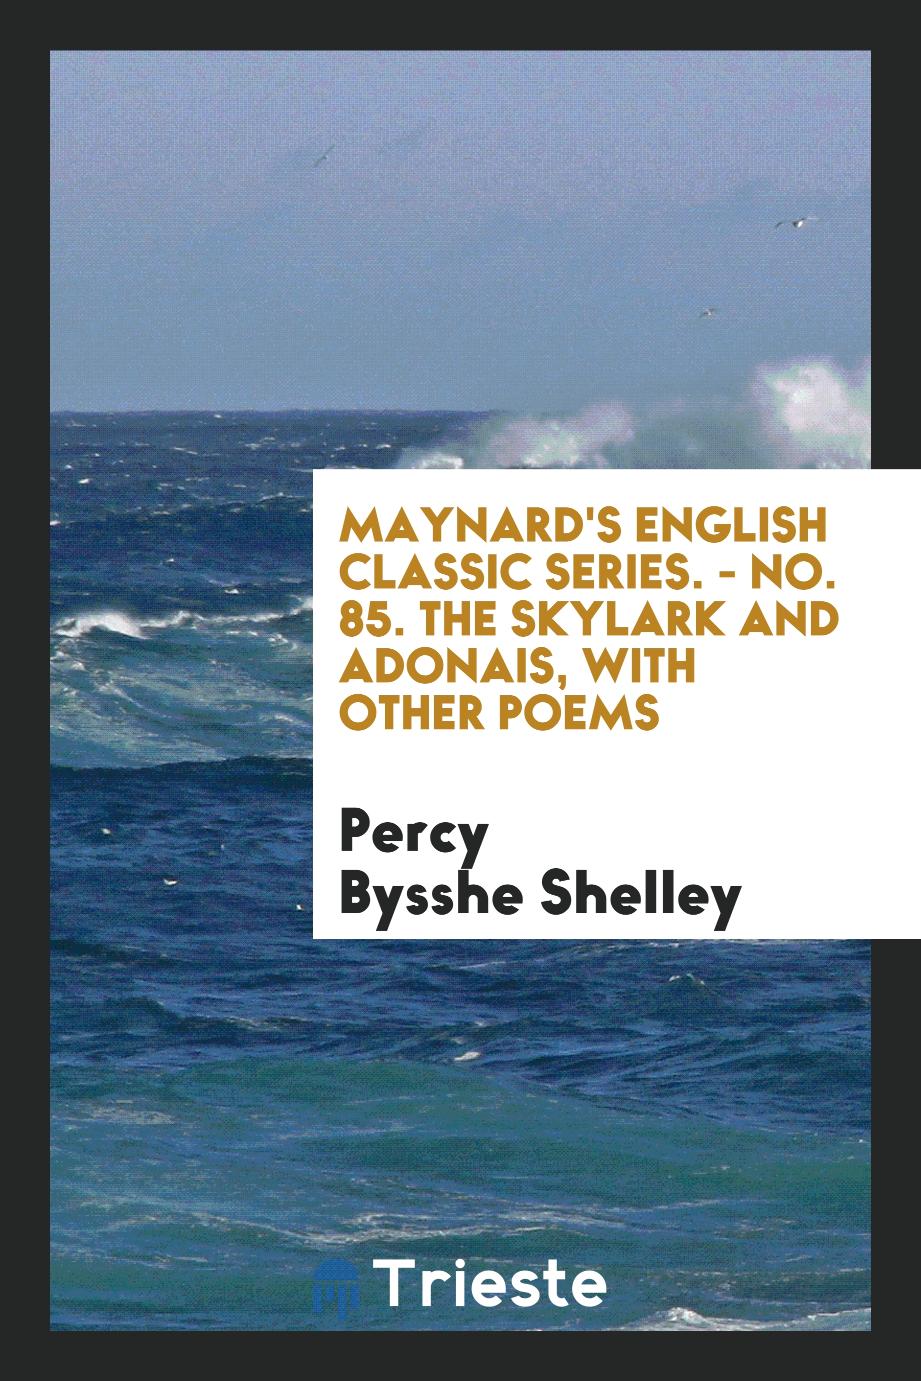 Maynard's english classic series. - No. 85. The Skylark and Adonais, with other poems